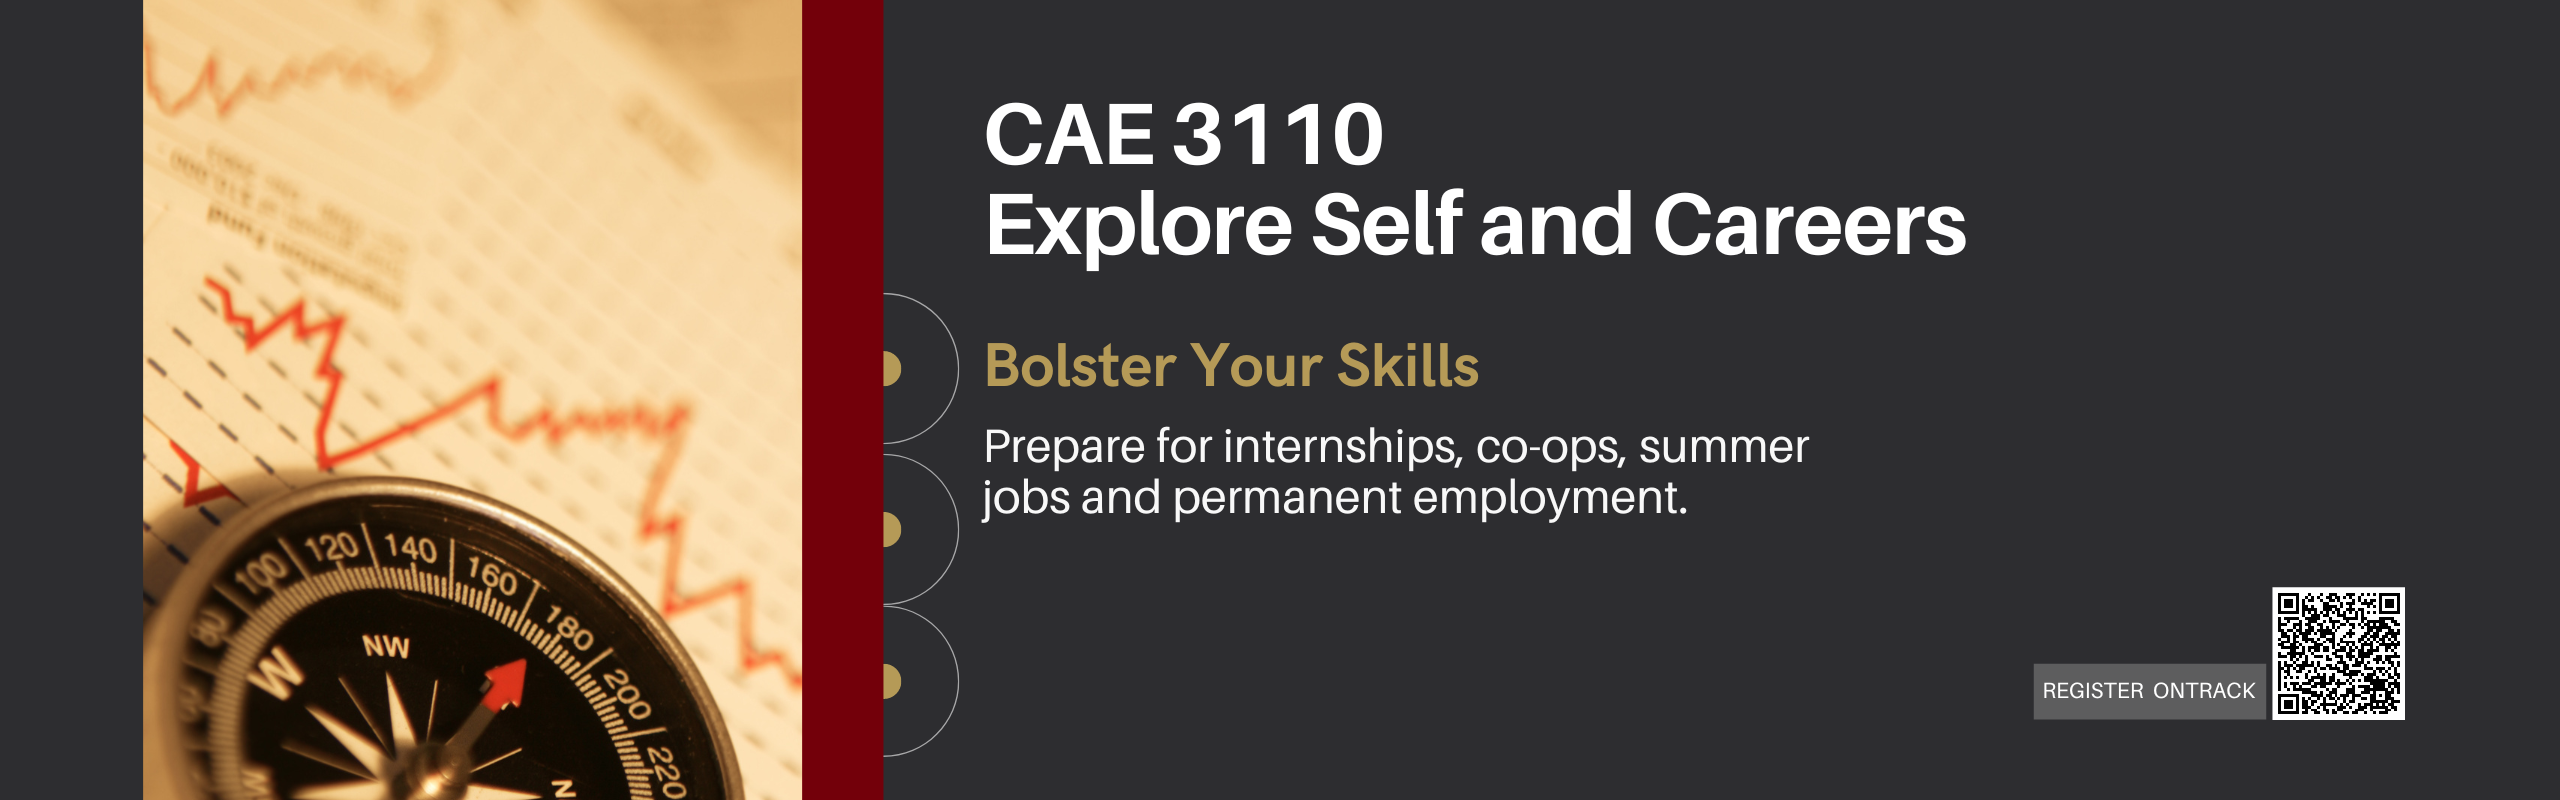 REGISTER FOR CAE COURSES 3110 ON TRACK